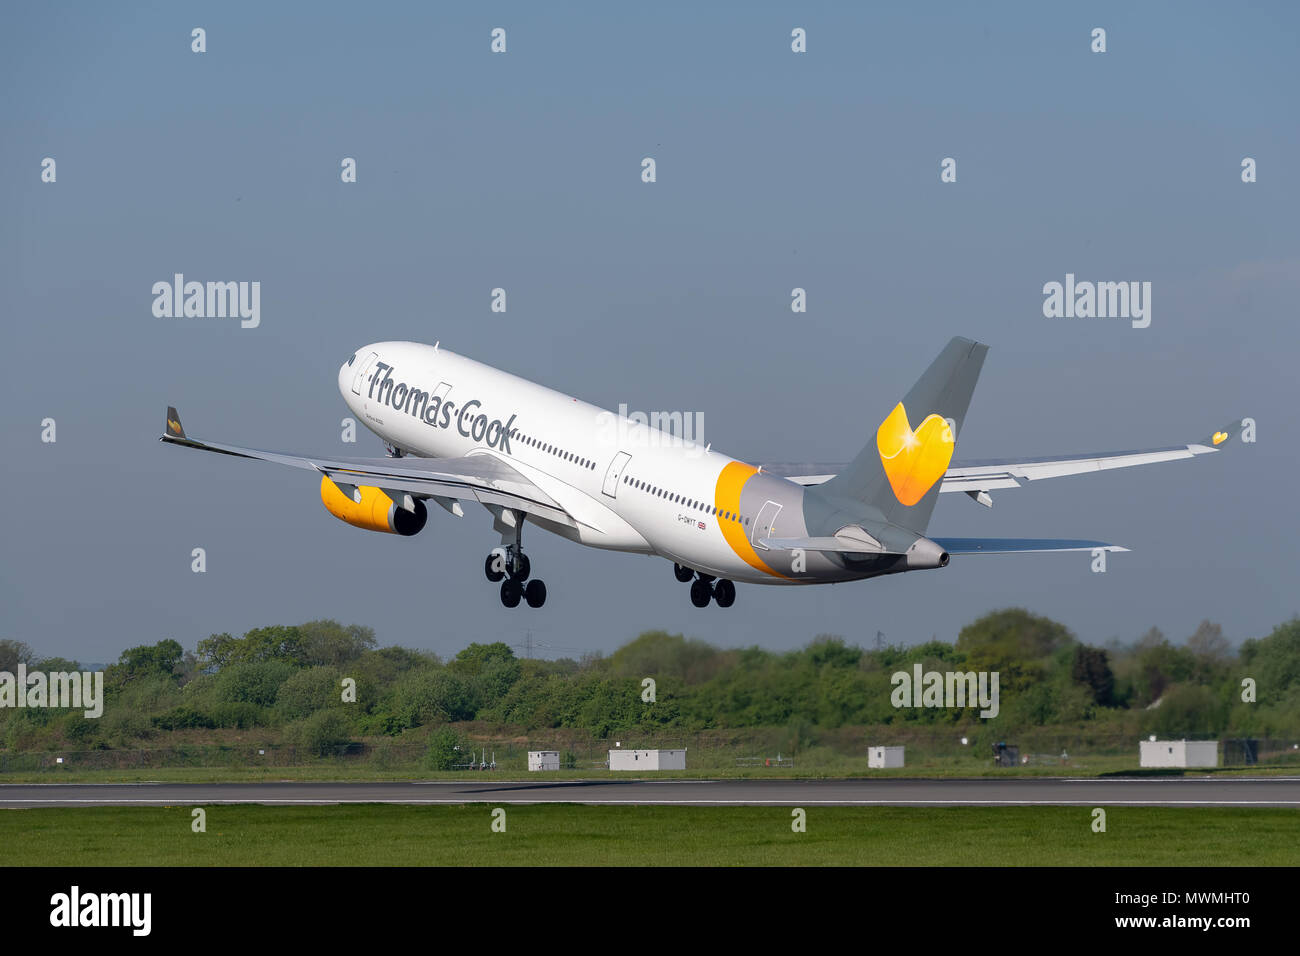 MANCHESTER, UNITED KINGDOM - MAY 07, 2018: Thomas Cook Airlines Airbus A330 departing Manchester airport Stock Photo